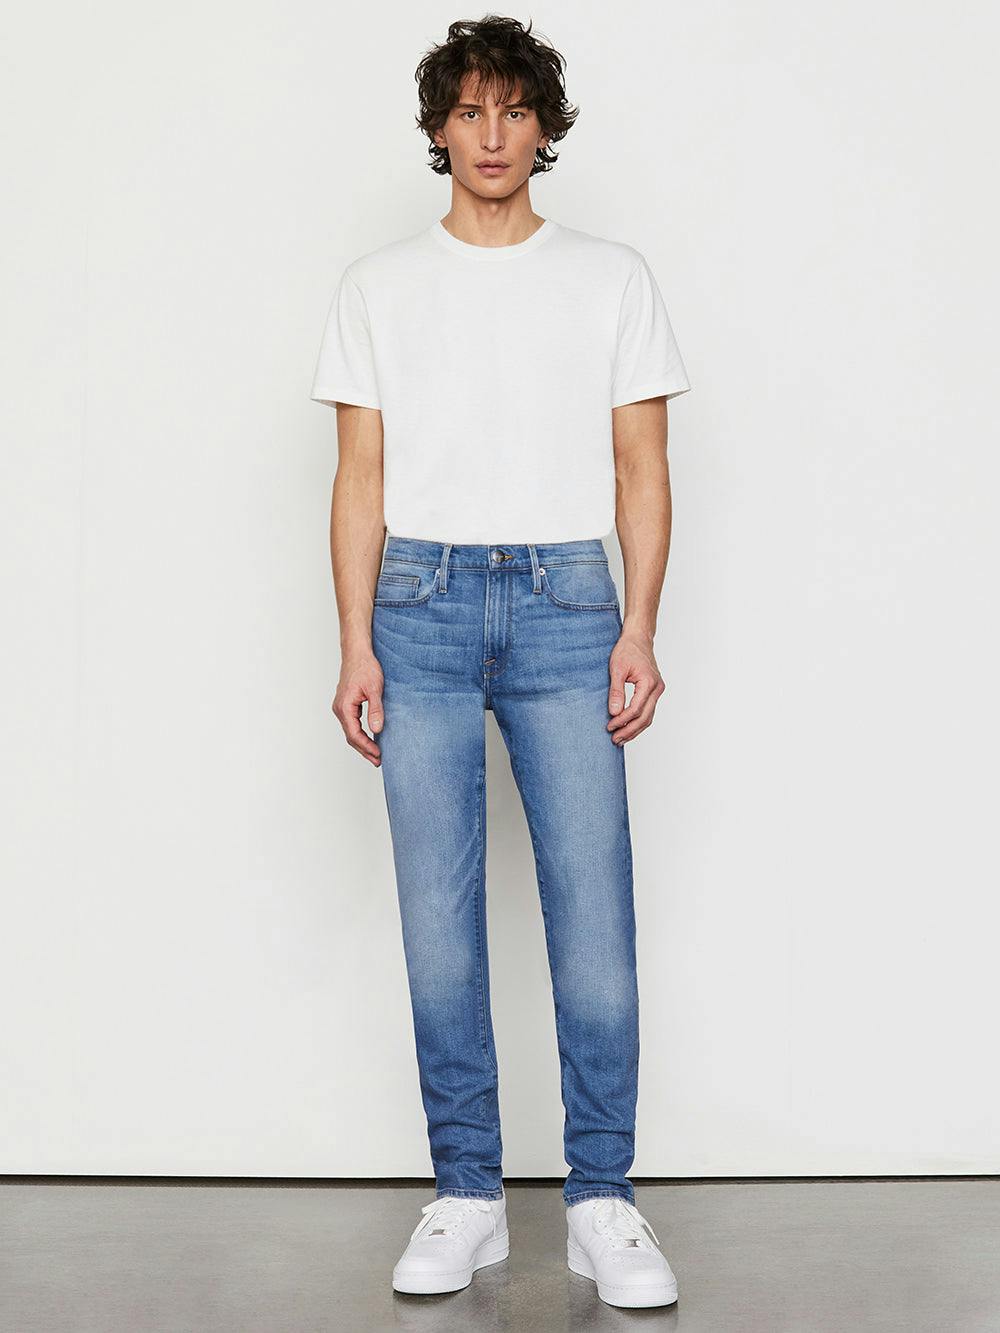 jeans front full body view alt:hover